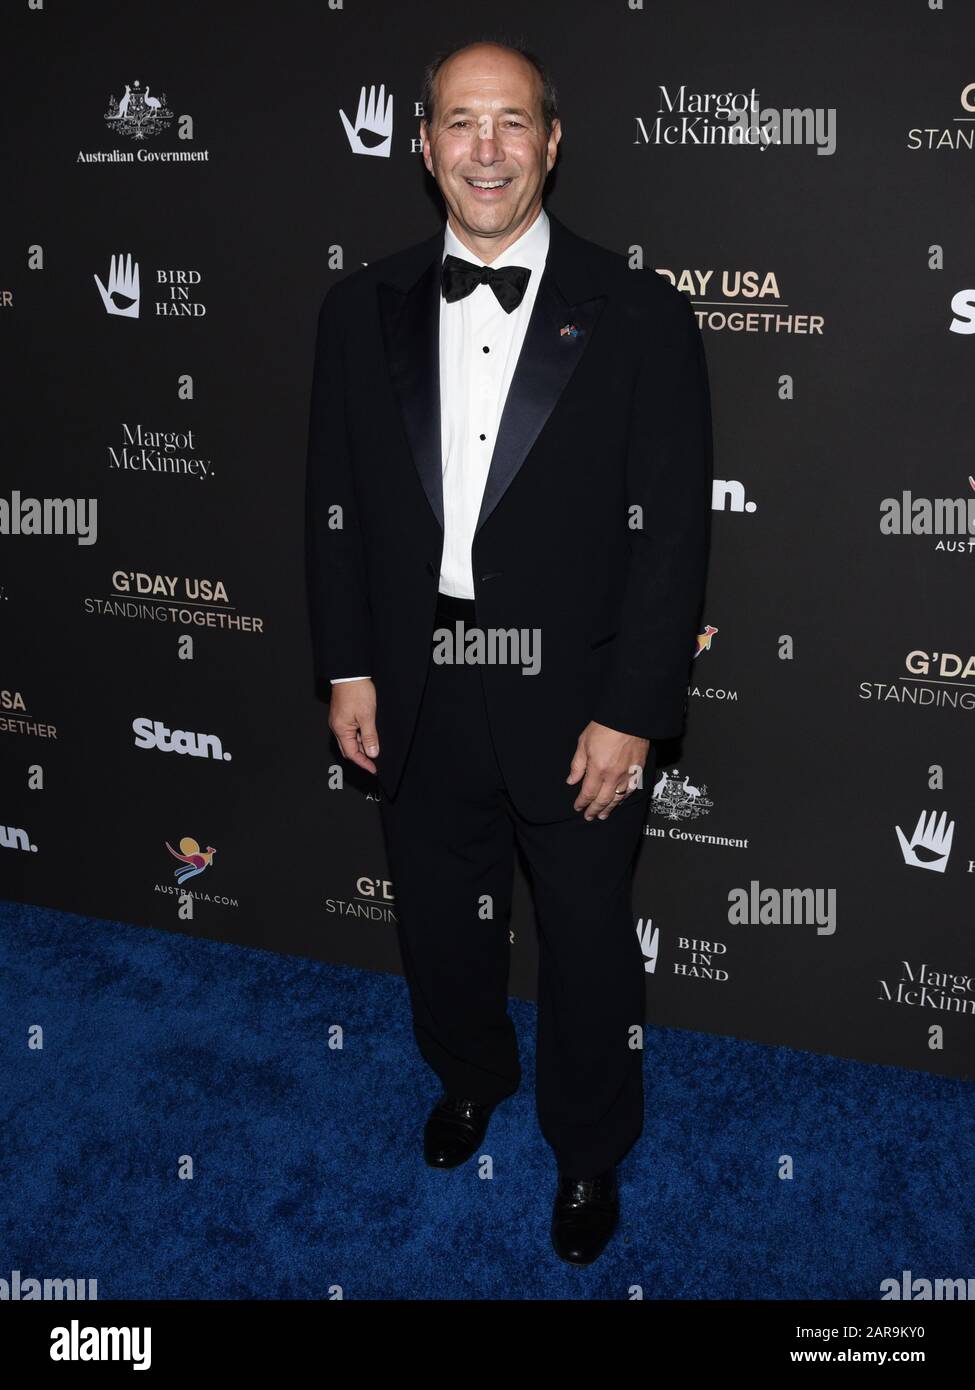 25 January 2020 - Beverly Hills, California - Ambassador Jeffrey Bleich. G'Day USA 2020 Standing Together Dinner held at the Beverly Wilshire Four Seasons Hotel. (Credit Image: © Billy Bennight/AdMedia via ZUMA Wire) Stock Photo